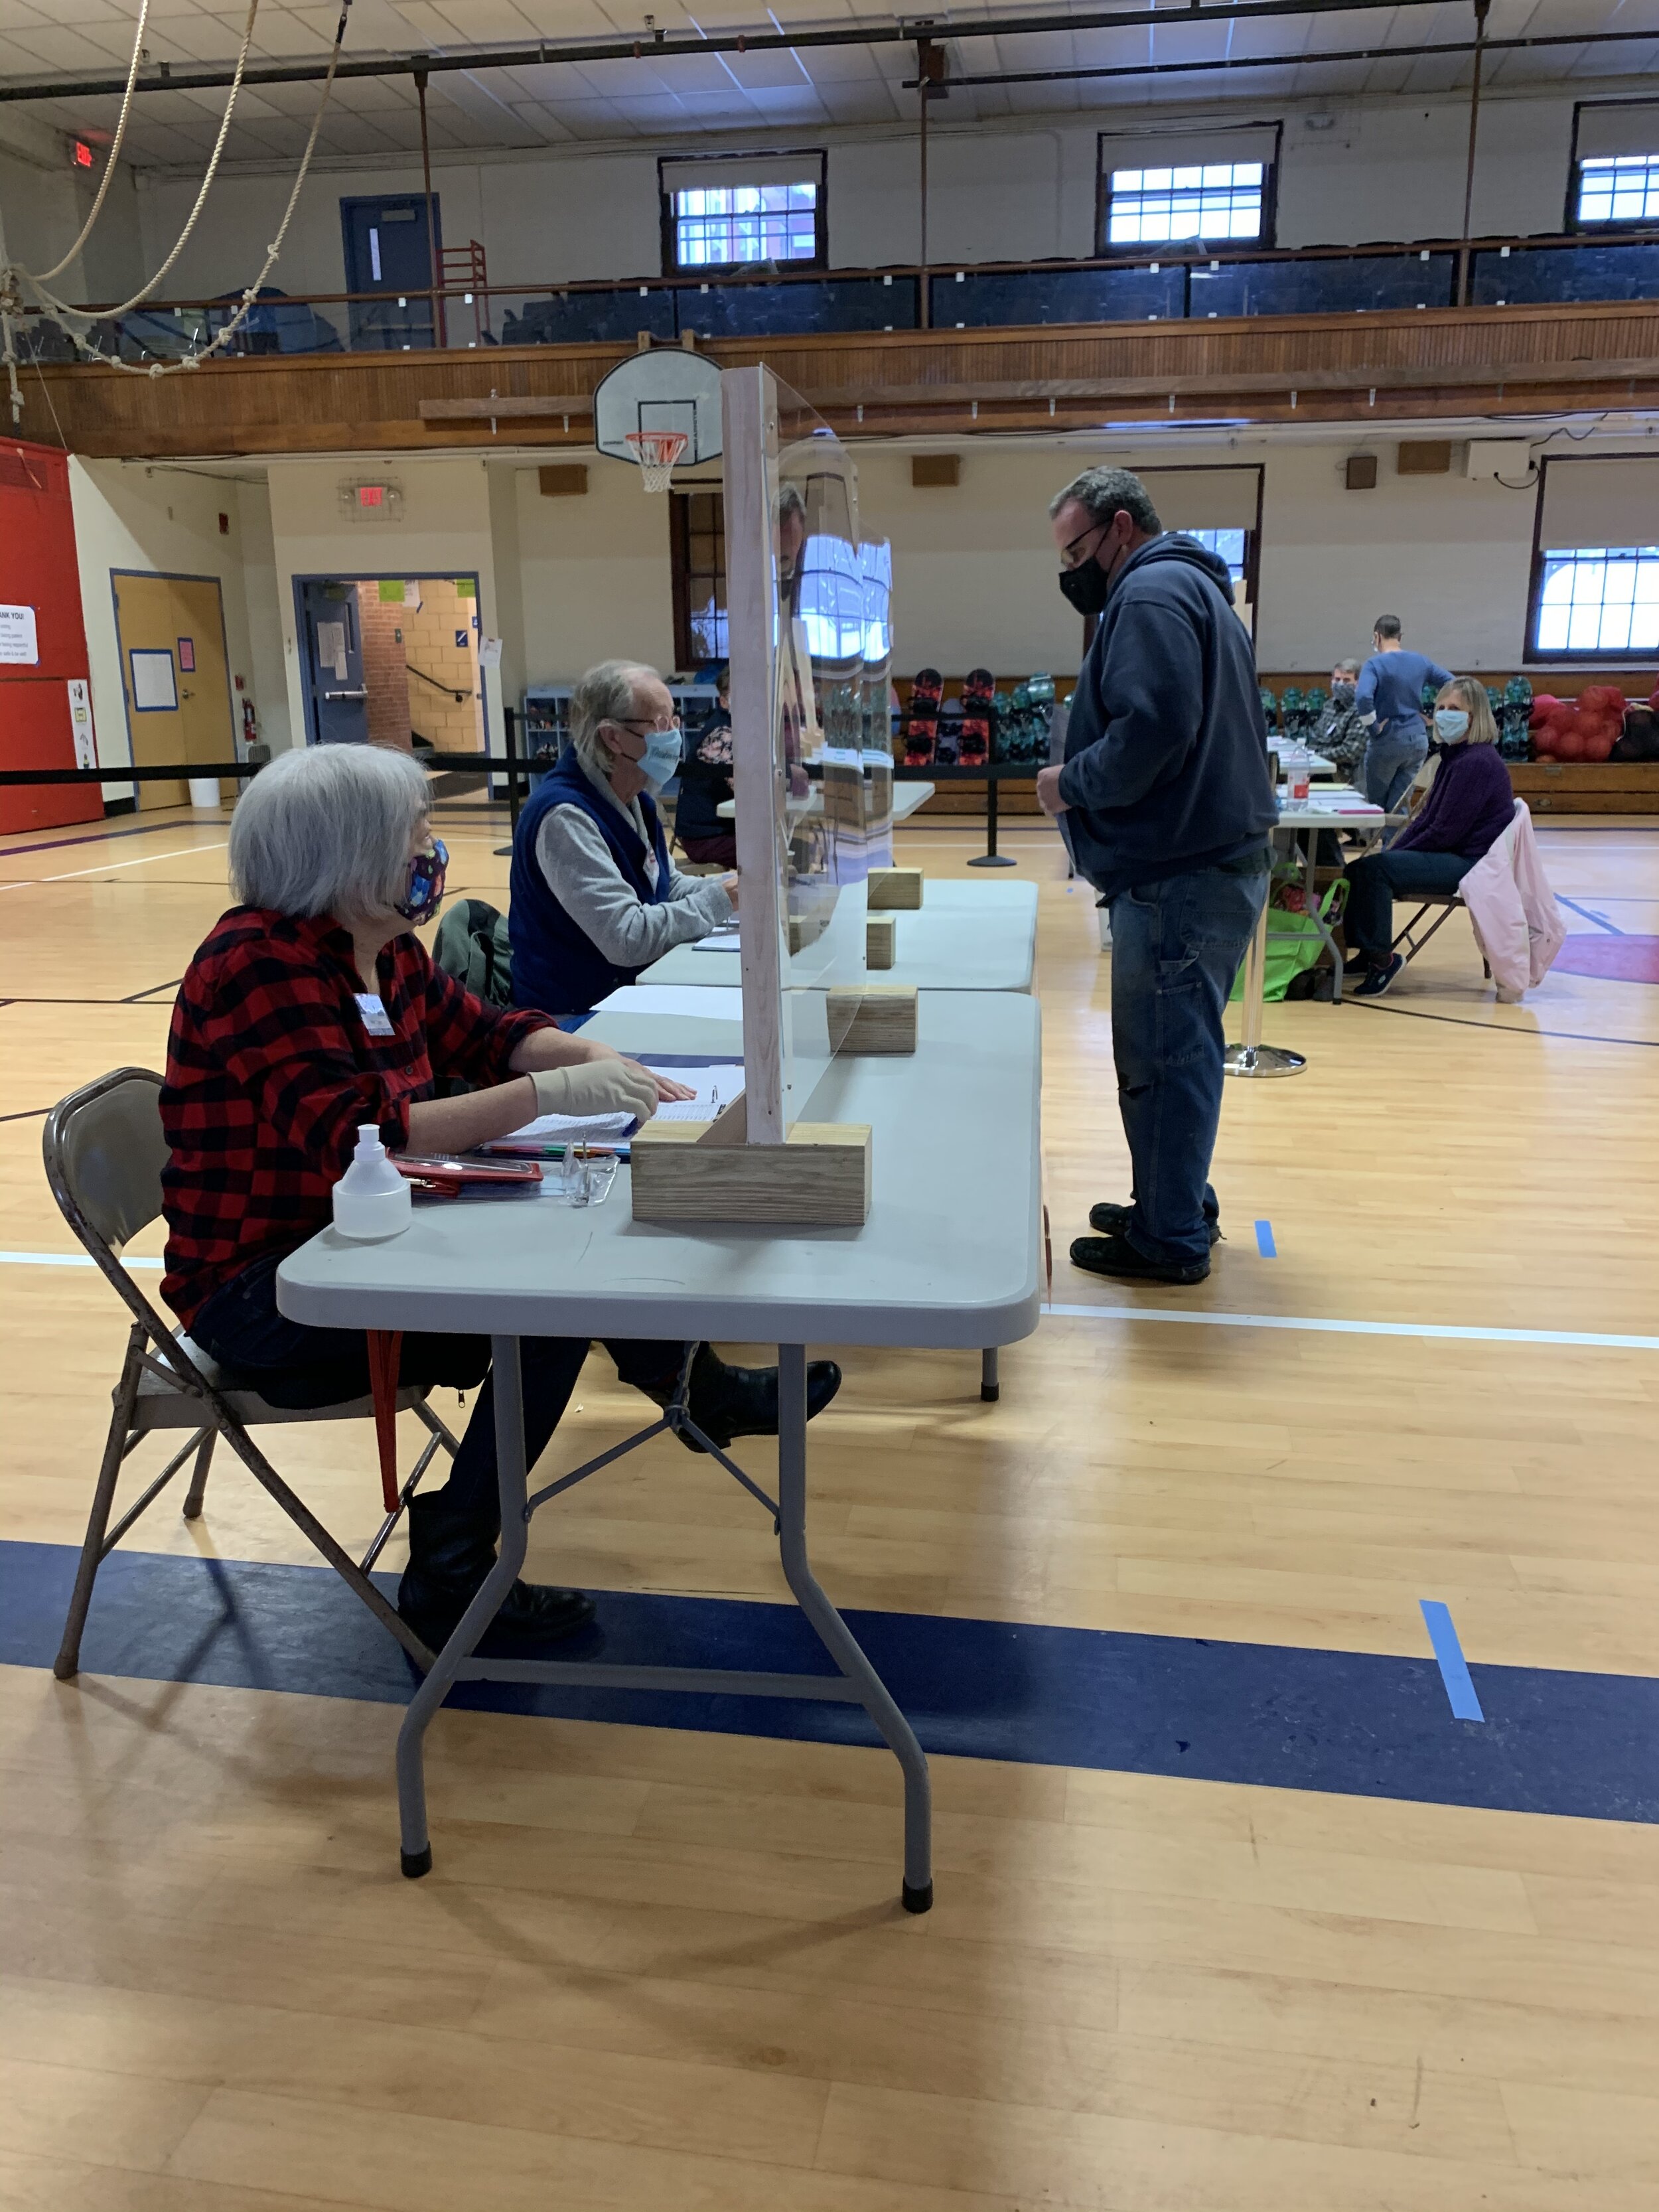   Election volunteers Pauline Nolte and John Bauer sit behind Plexiglas shields at their checking stations inside Thatcher Brook gym on Tuesday. Photo by Lisa Scagliotti.  